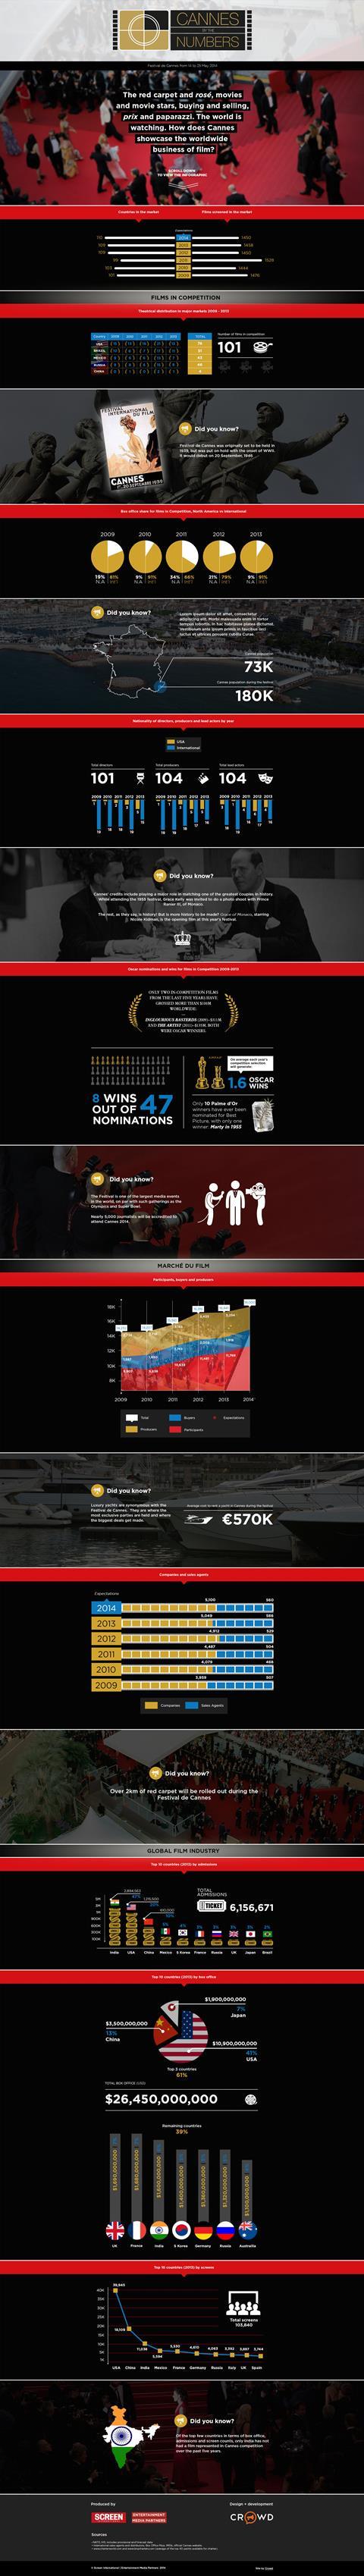 Cannes 2014: Infographic